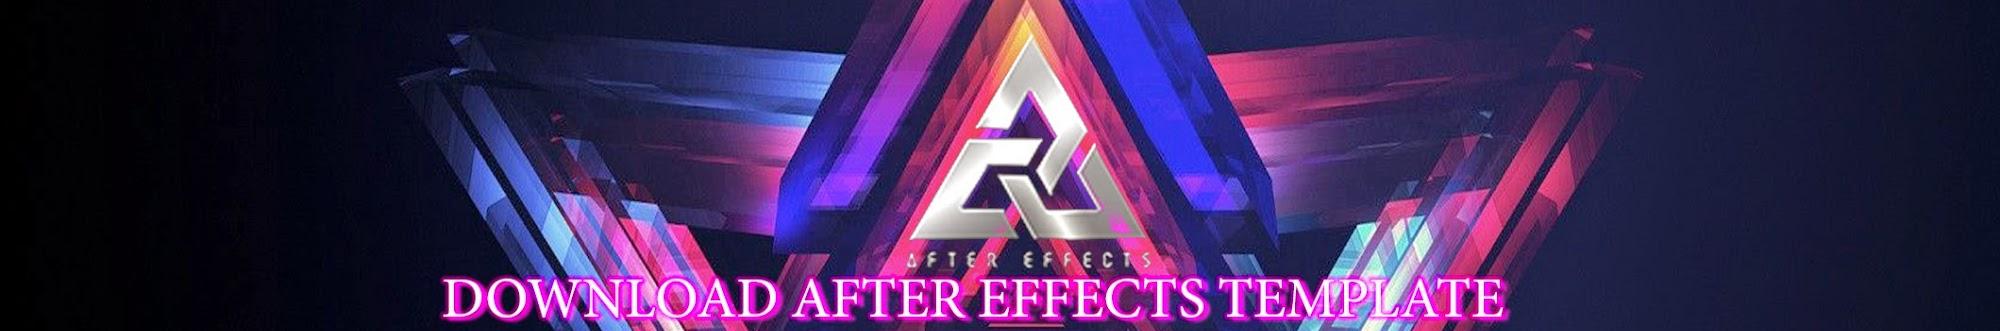 Download After Effects Template